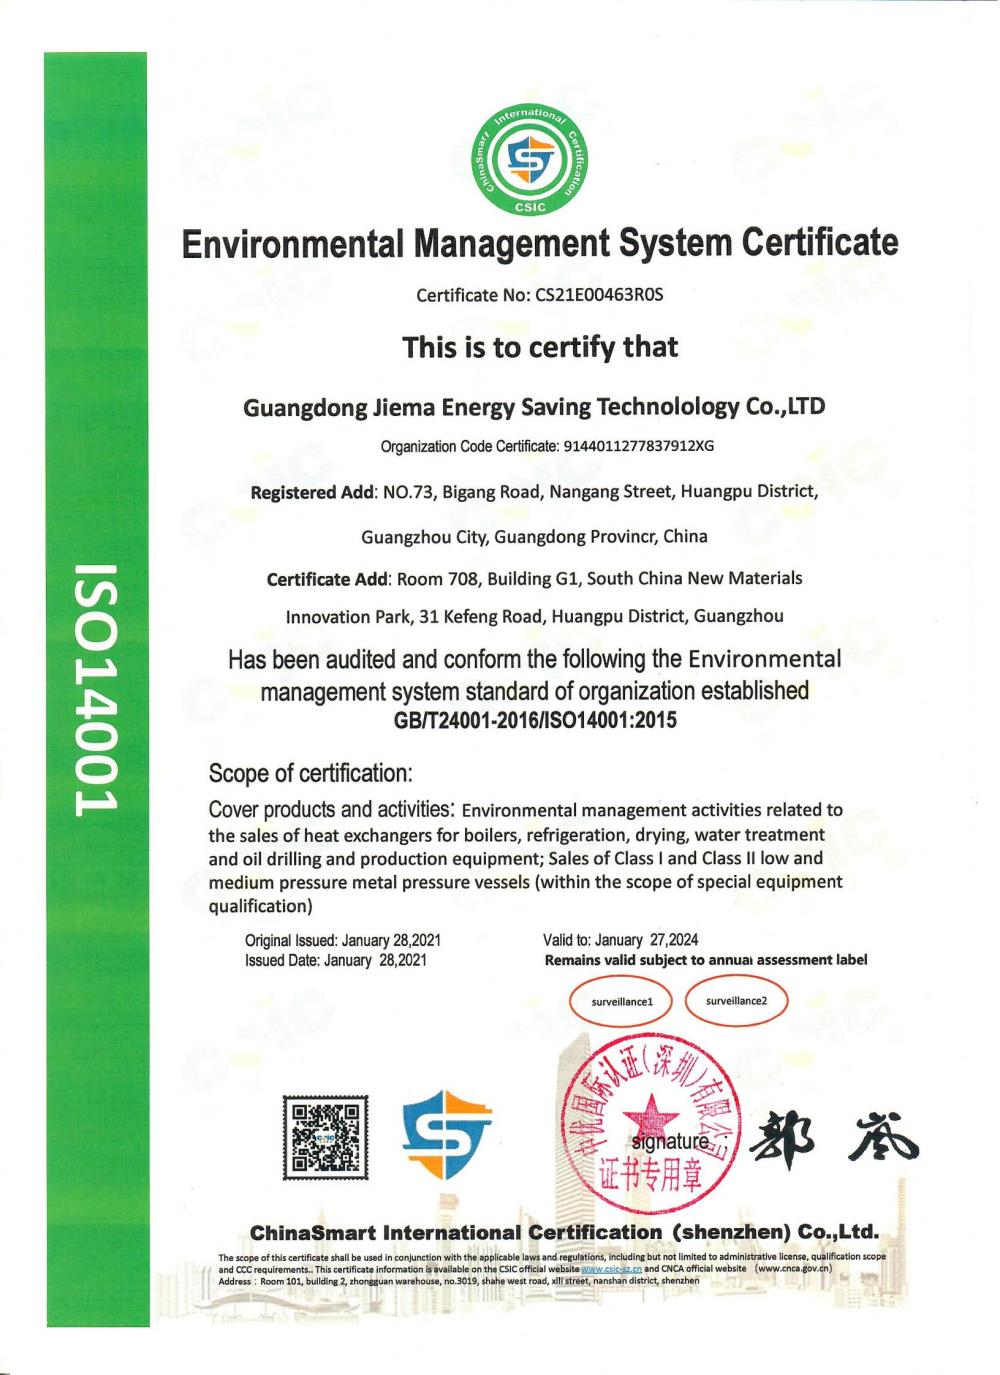 ISO certification of Environmental Management System 